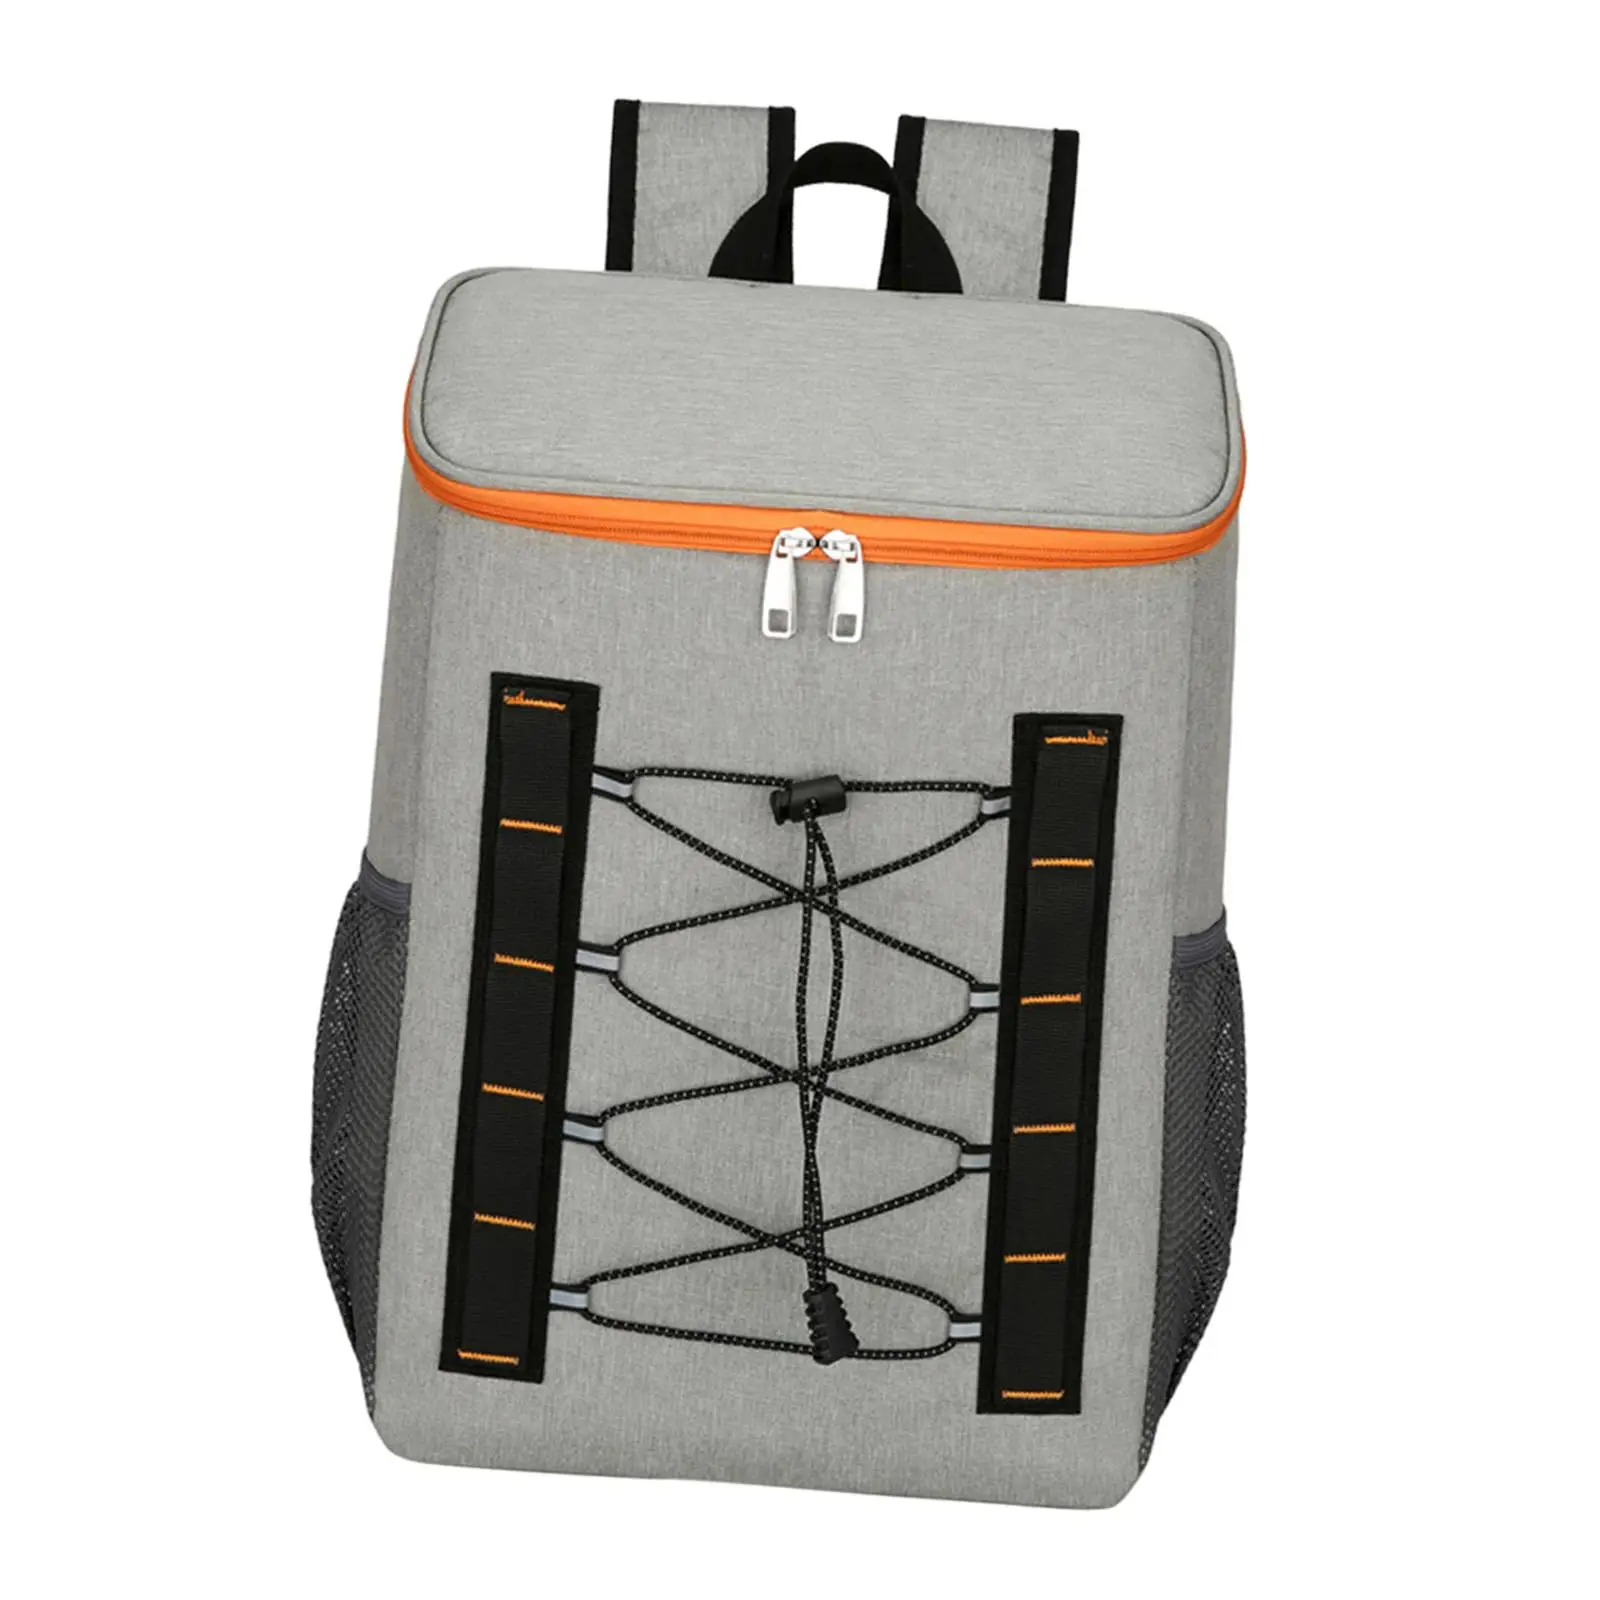 Outdoor Picnic Bag Thermal Bag Portable Large Capacity Insulated Backpack Cooler Bag for Park Day Trips Picnic Fishing Hiking